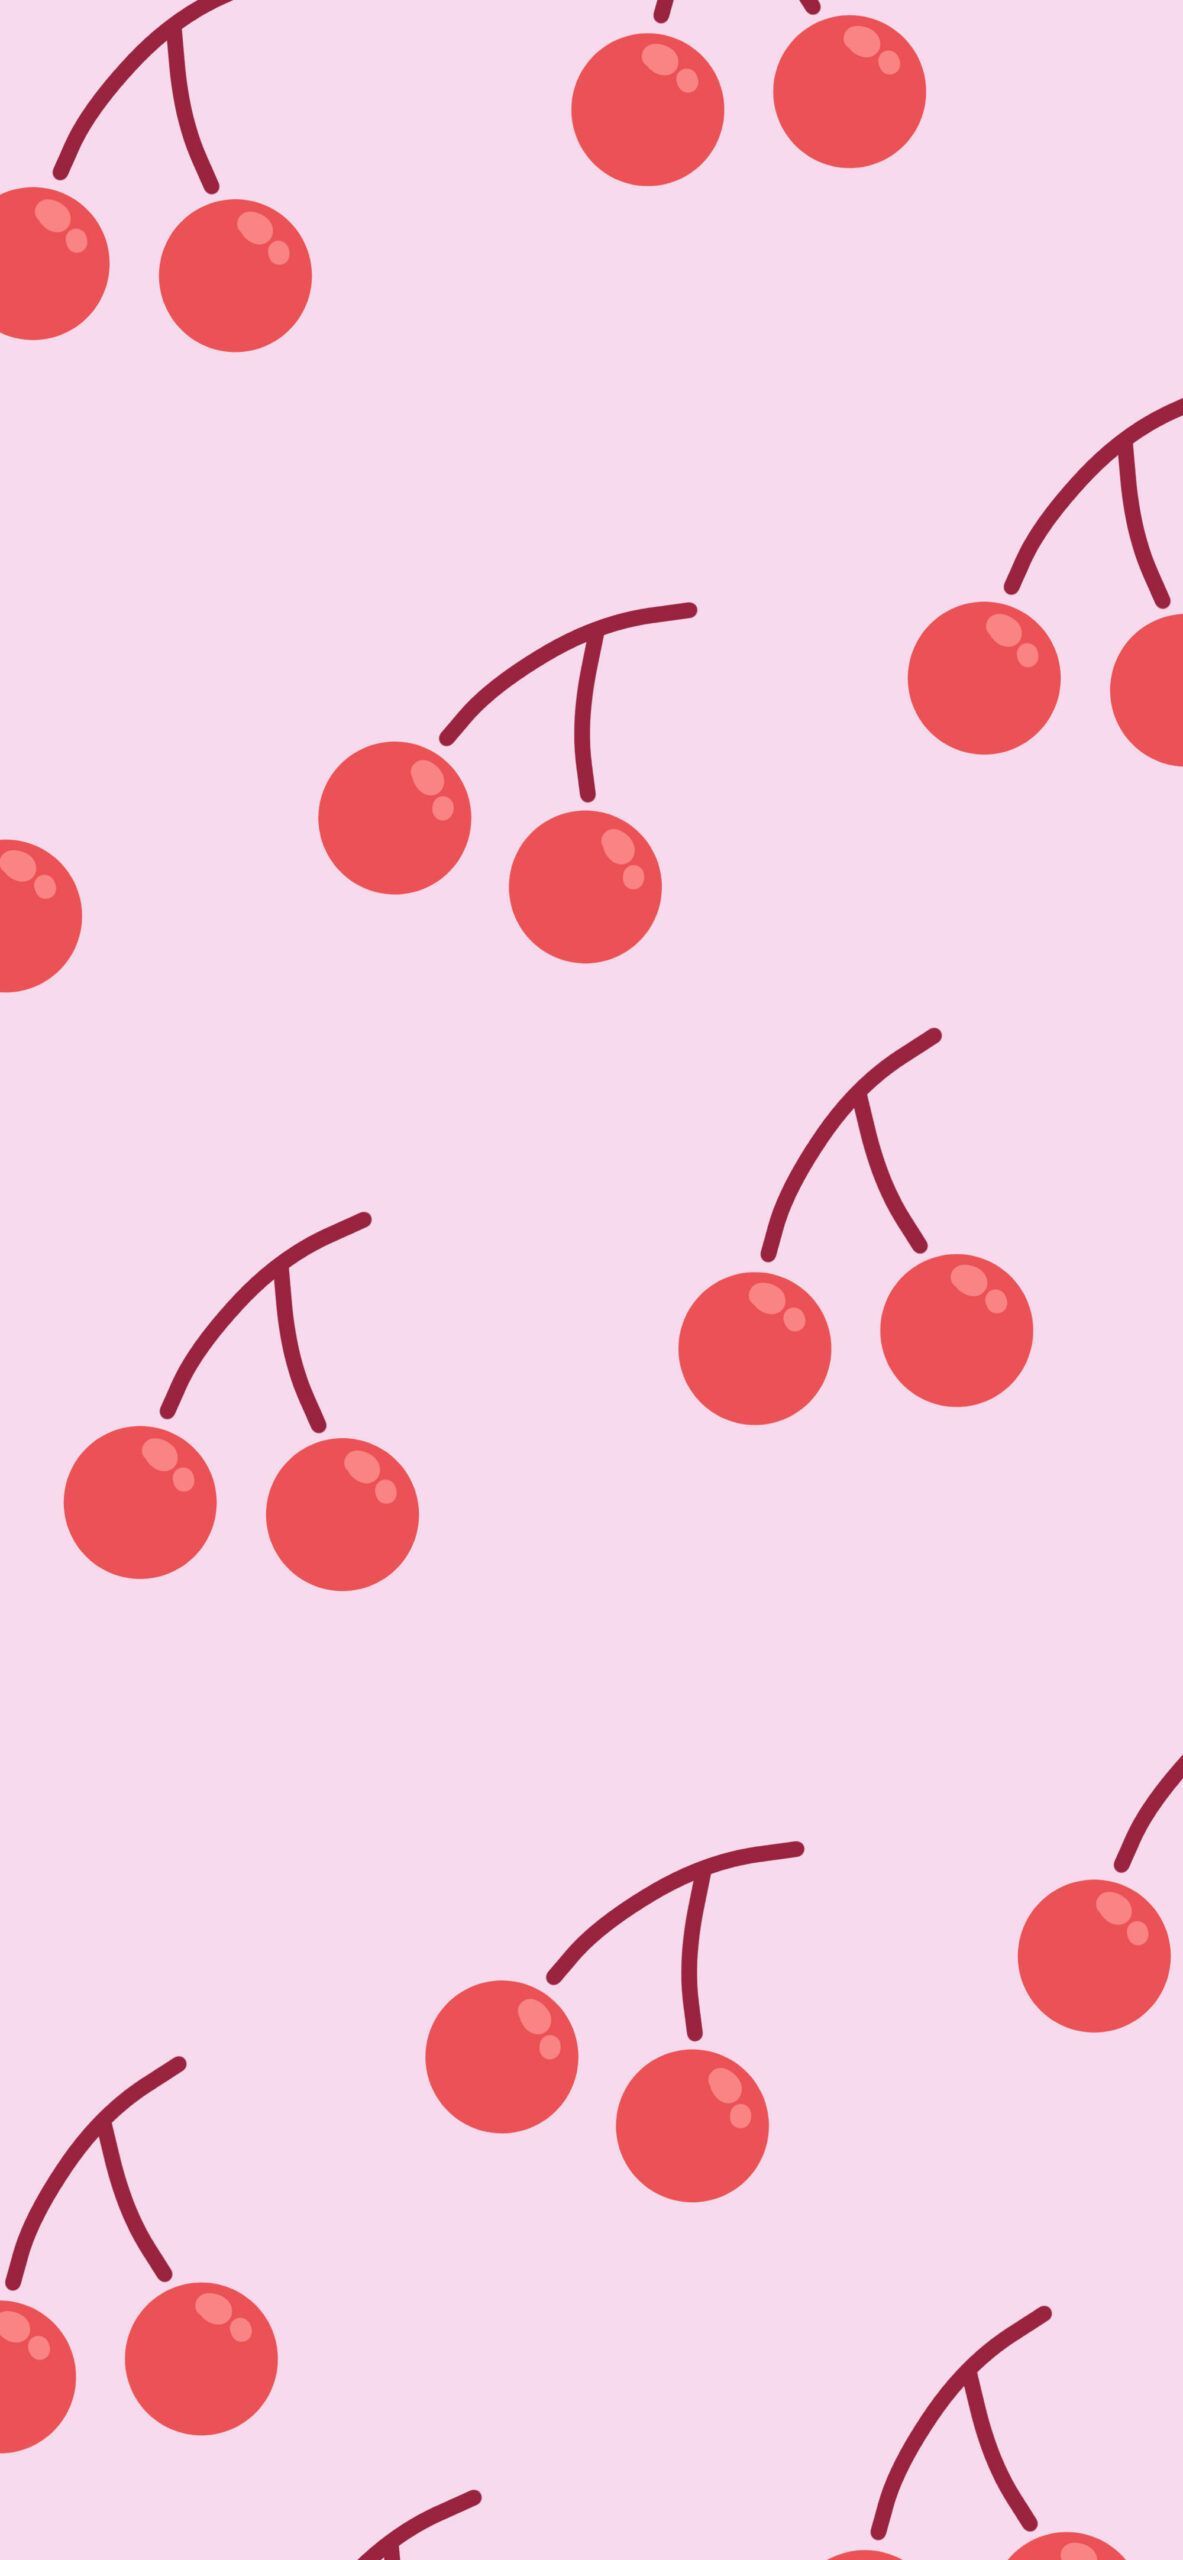 A pattern of cherries on pink background - Cherry, cute pink